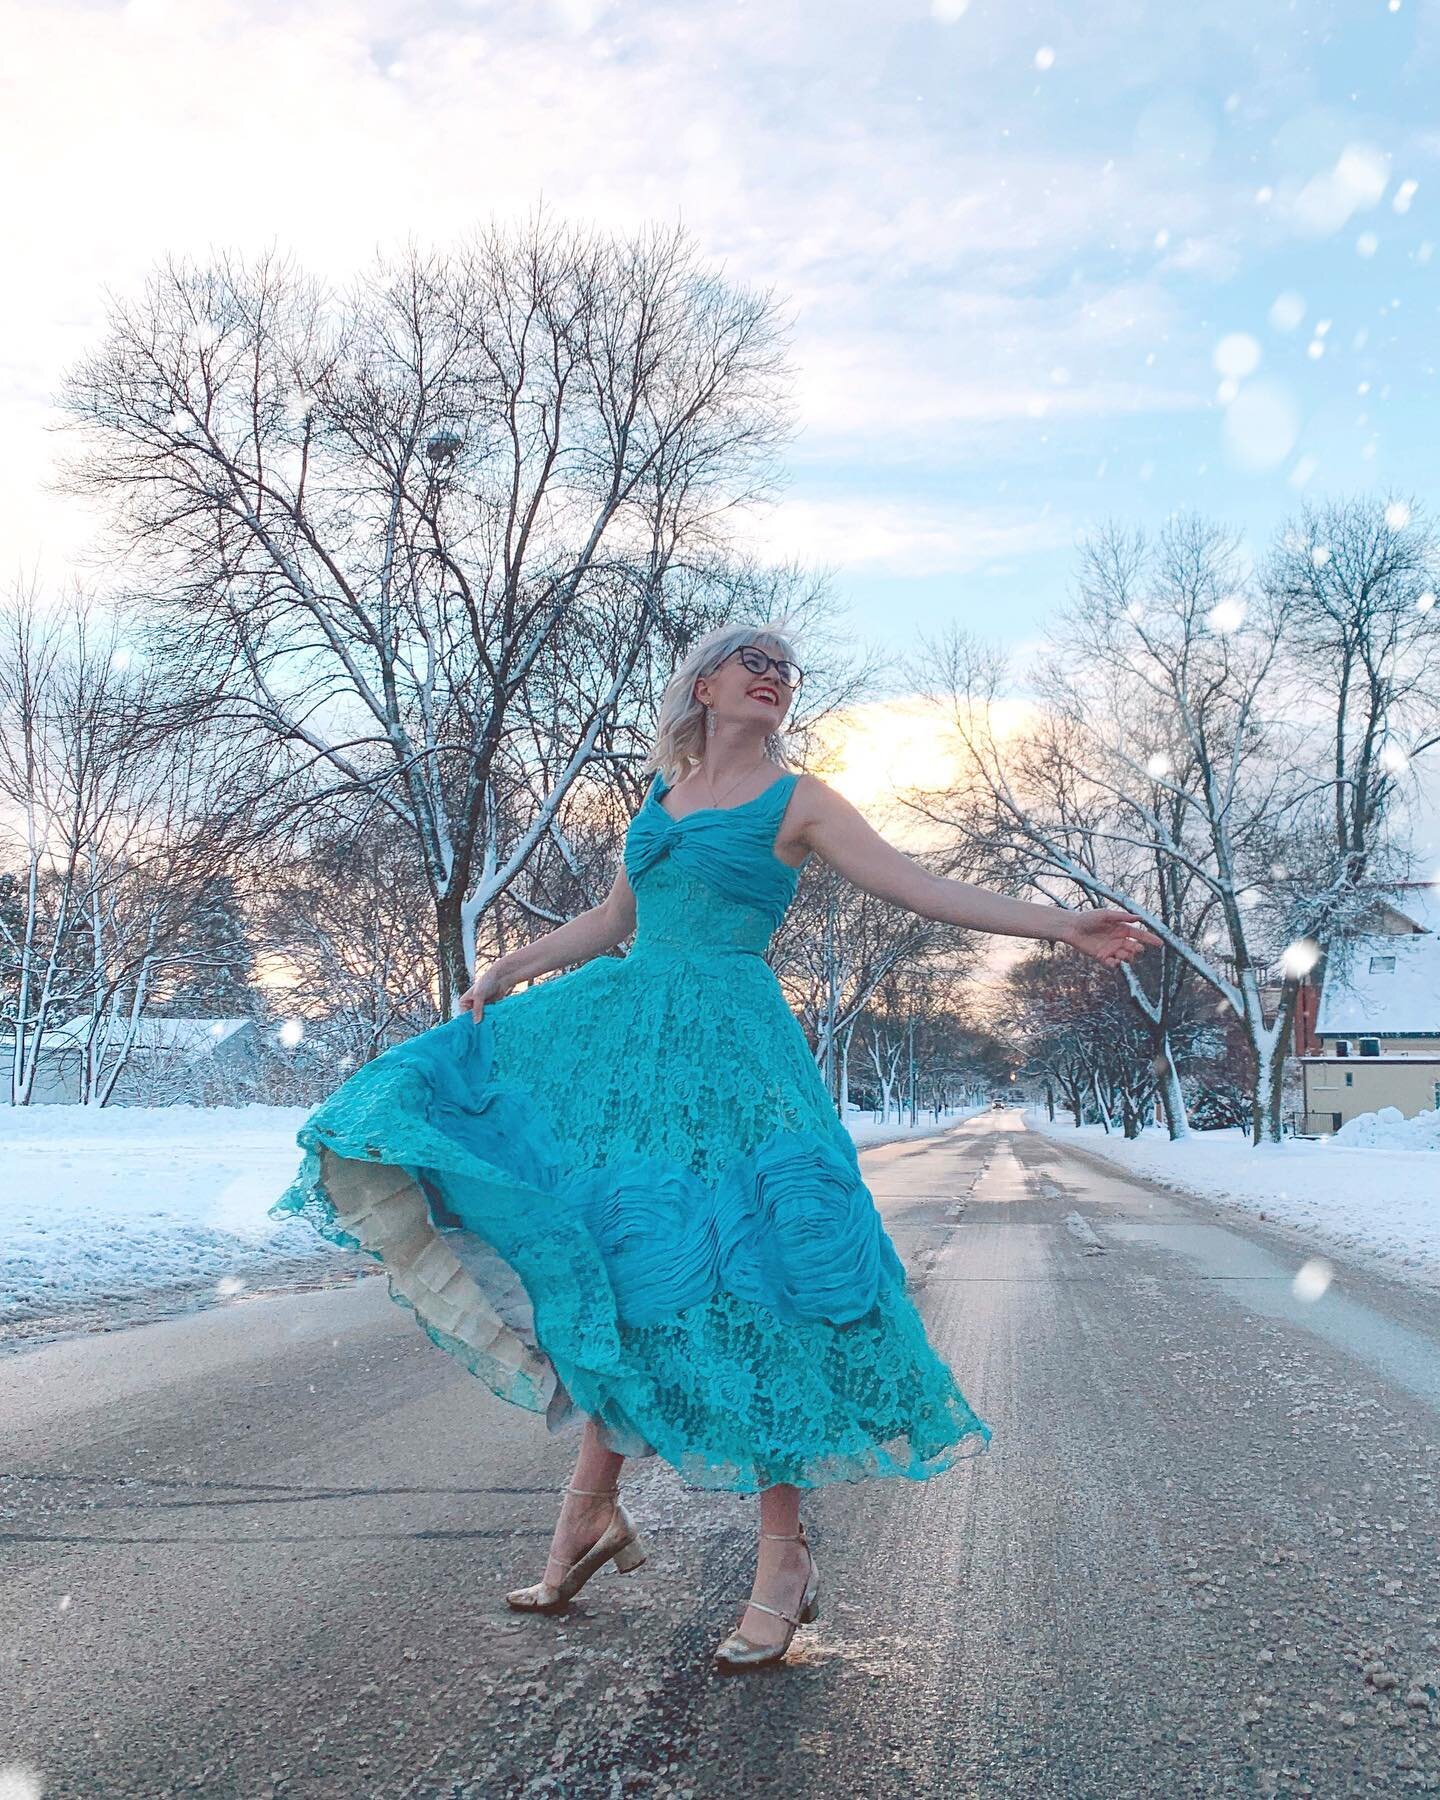 ✨WATCHES WHITE CHRISTMAS ONCE...✨✨ changes entire aesthetic to 50s winter glamour! ❄️❄️❄️
.
I was perusing Etsy as I do 😅 and saw this dress and it reminded me so much of the dress worn by Vera Ellen and Rosemary Clooney in White Christmas &ldquo;Si